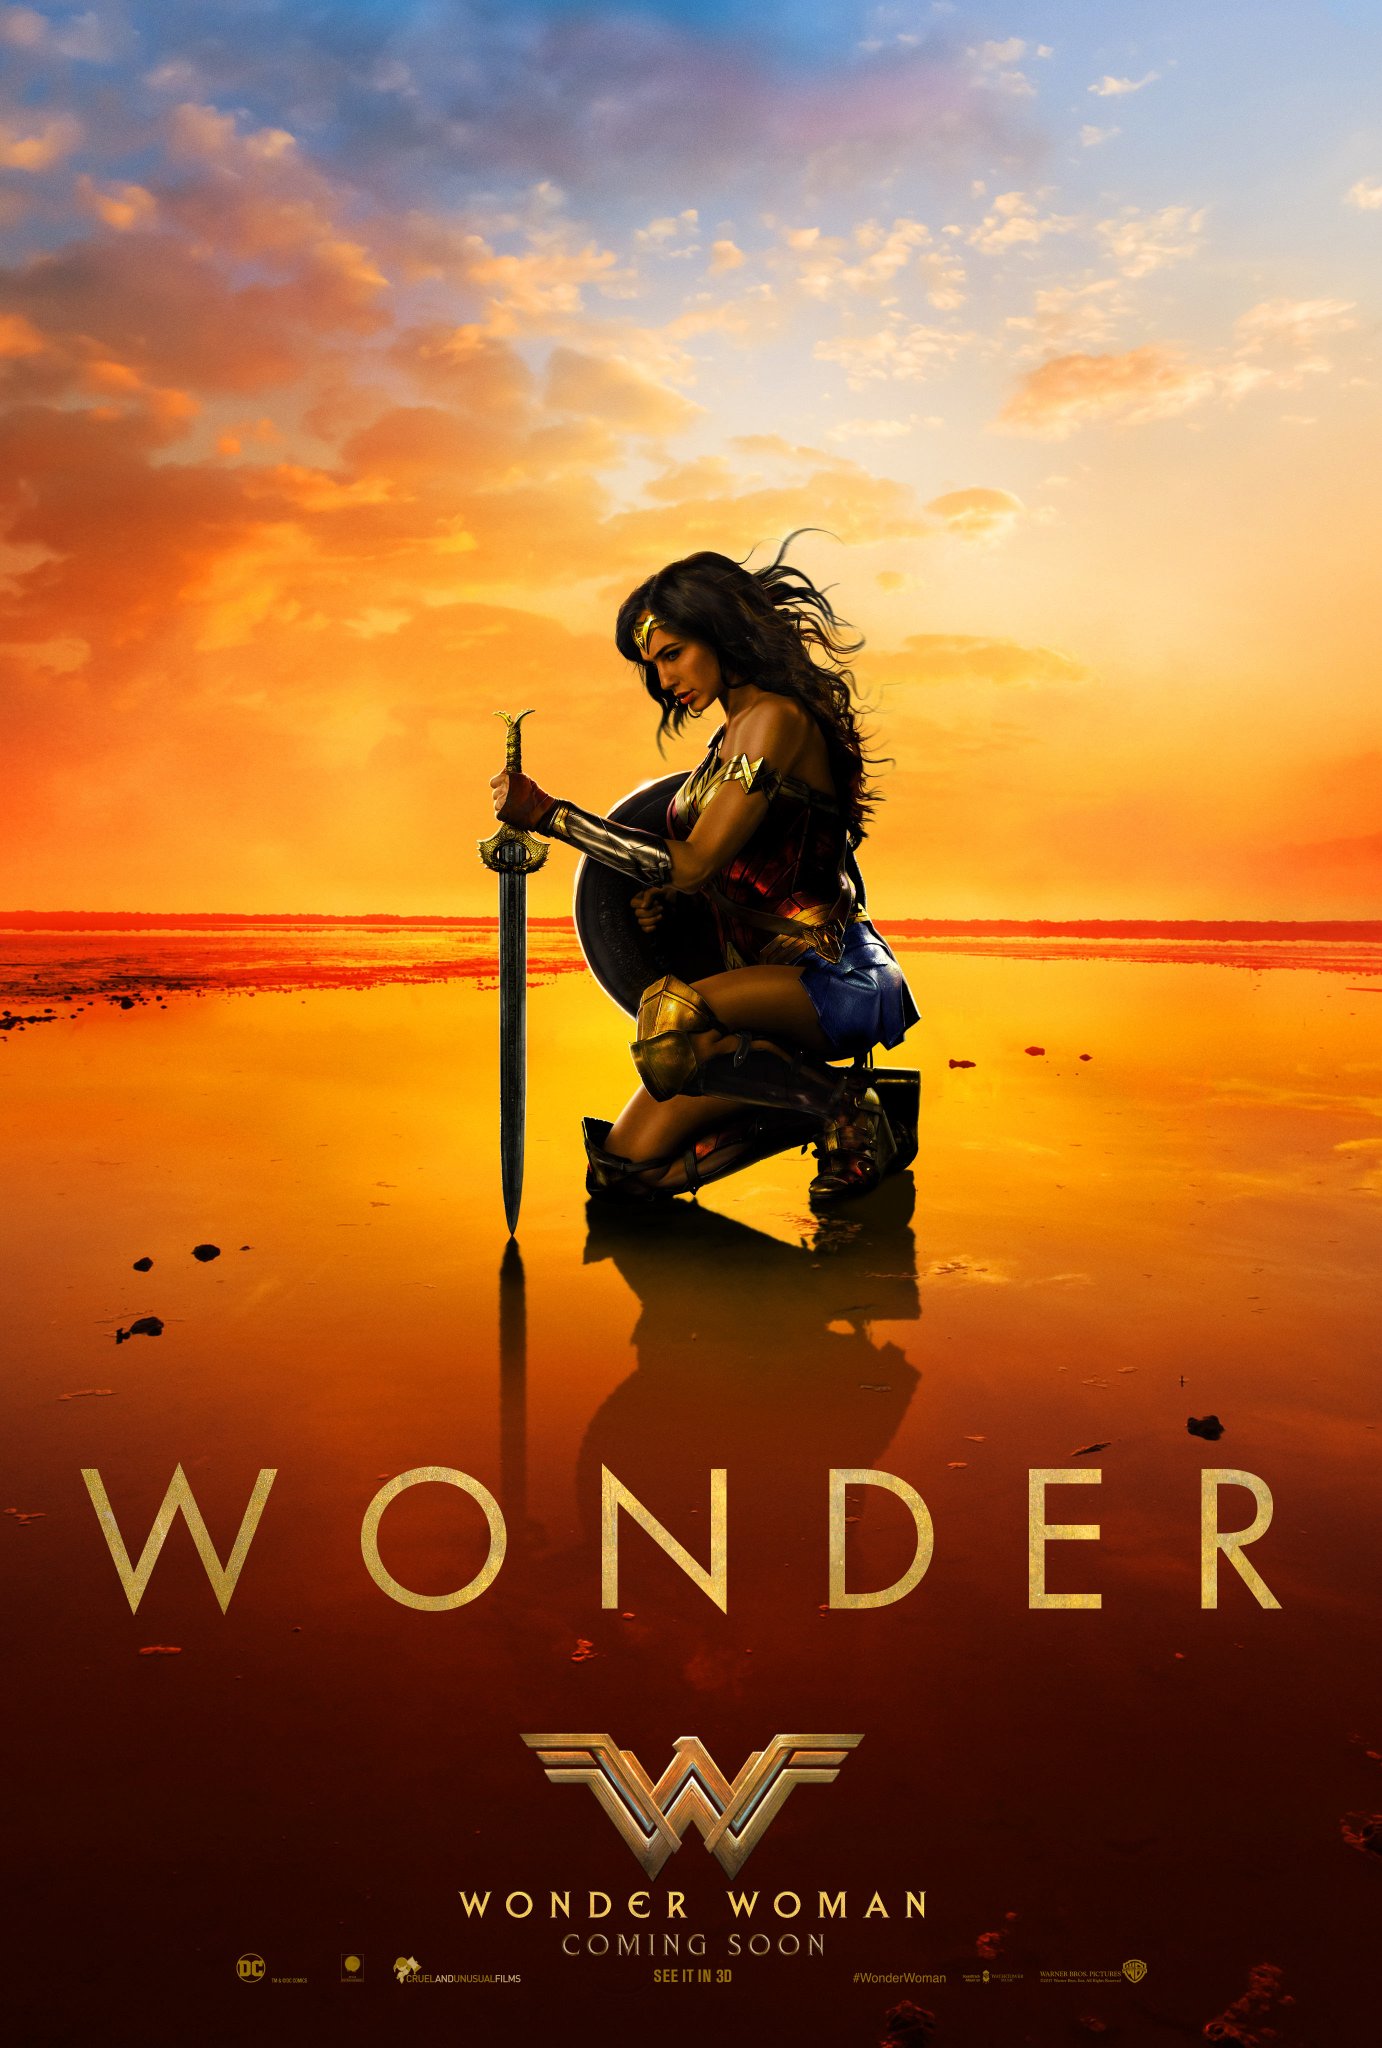 Wonder Woman film review: it’s about damn time